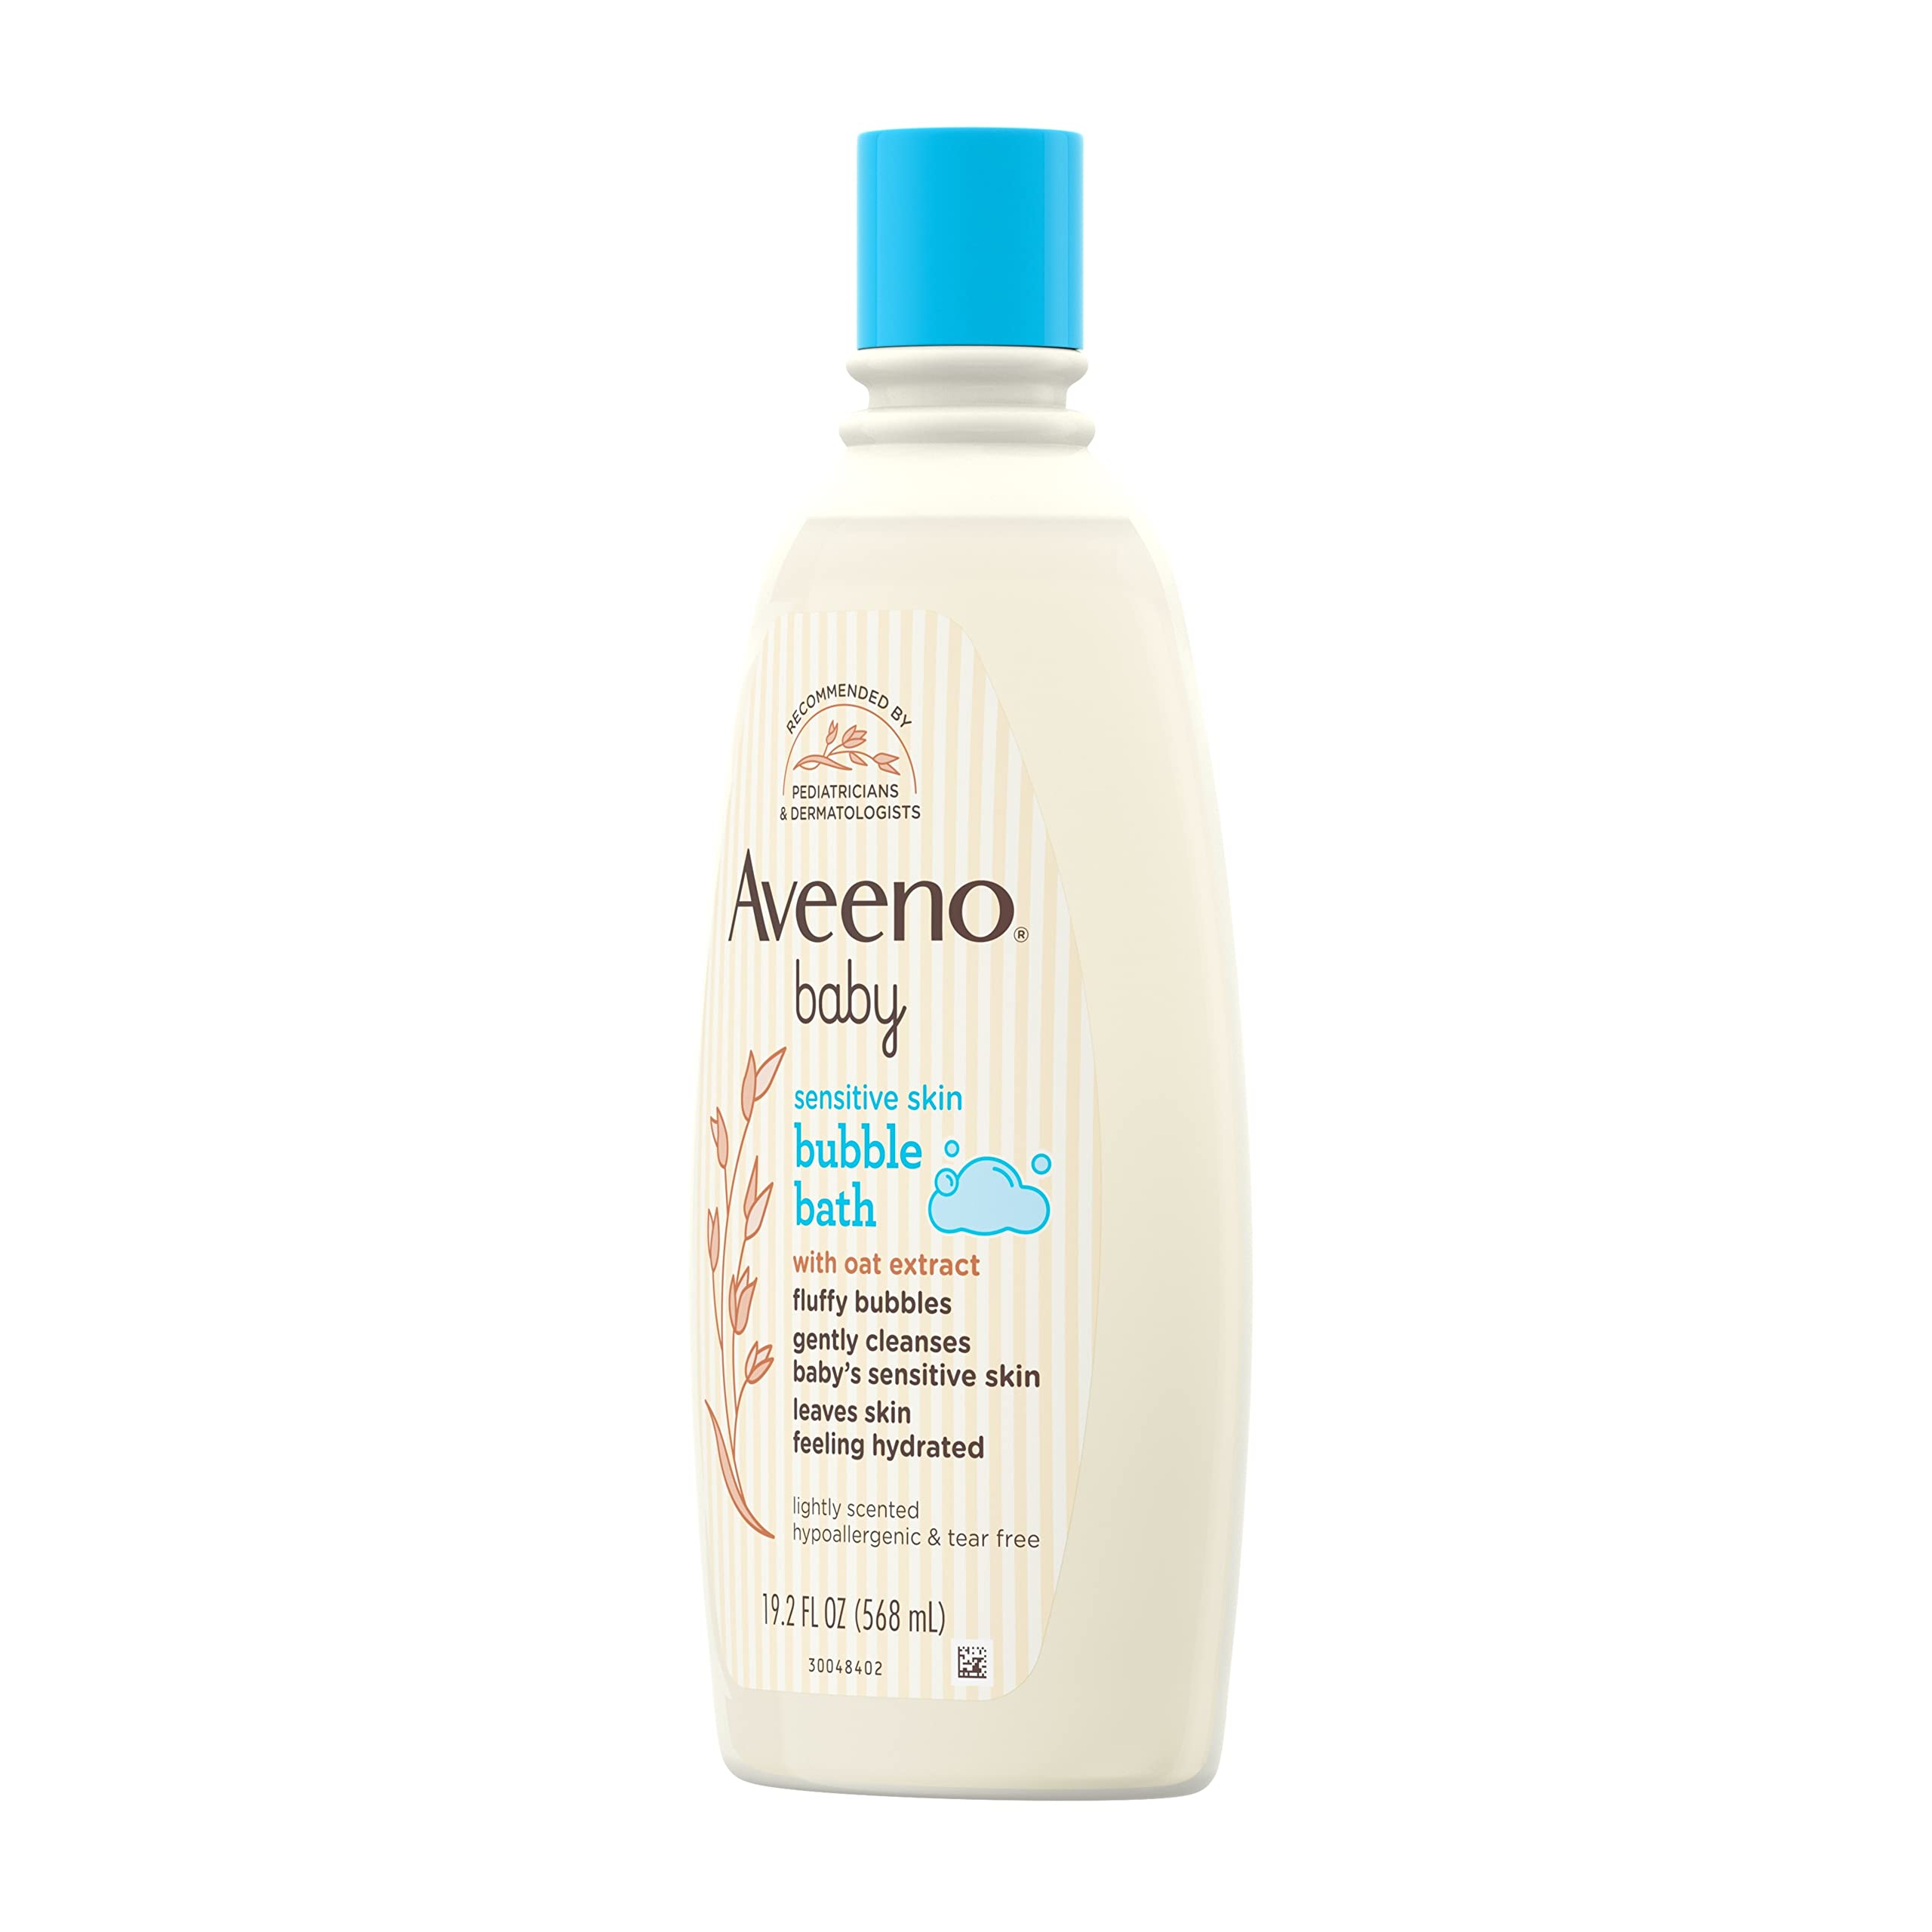 Aveeno Baby Sensitive Skin Bubble Bath with Oat Extract, Gently Cleanses and Leaves Skin Feeling Hydrated, Tear-Free Formula, Hypoallergenic, Paraben-, Phthalate-, Soap- & Dye-Free, 19.2 fl. Oz